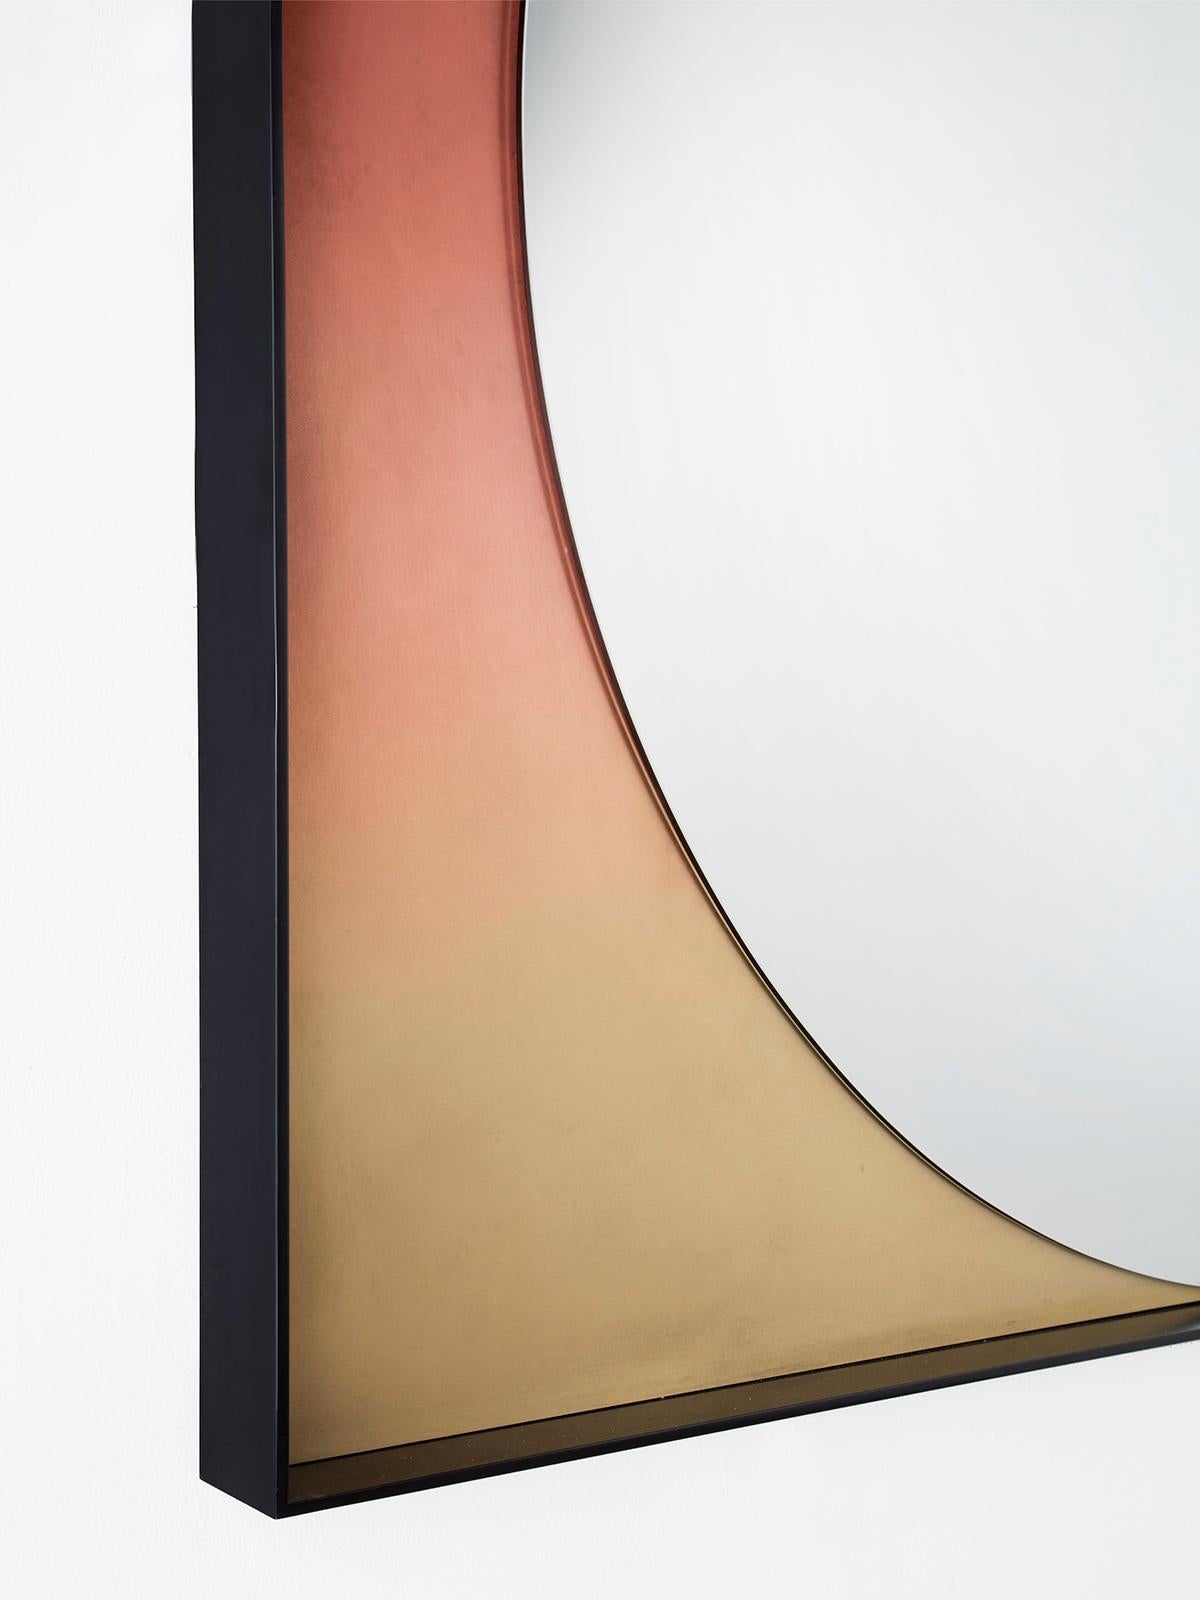 Slip Mirror in Contemporary Blackened Steel and Rose Gradient Patinated Bronze In New Condition For Sale In Brooklyn, NY